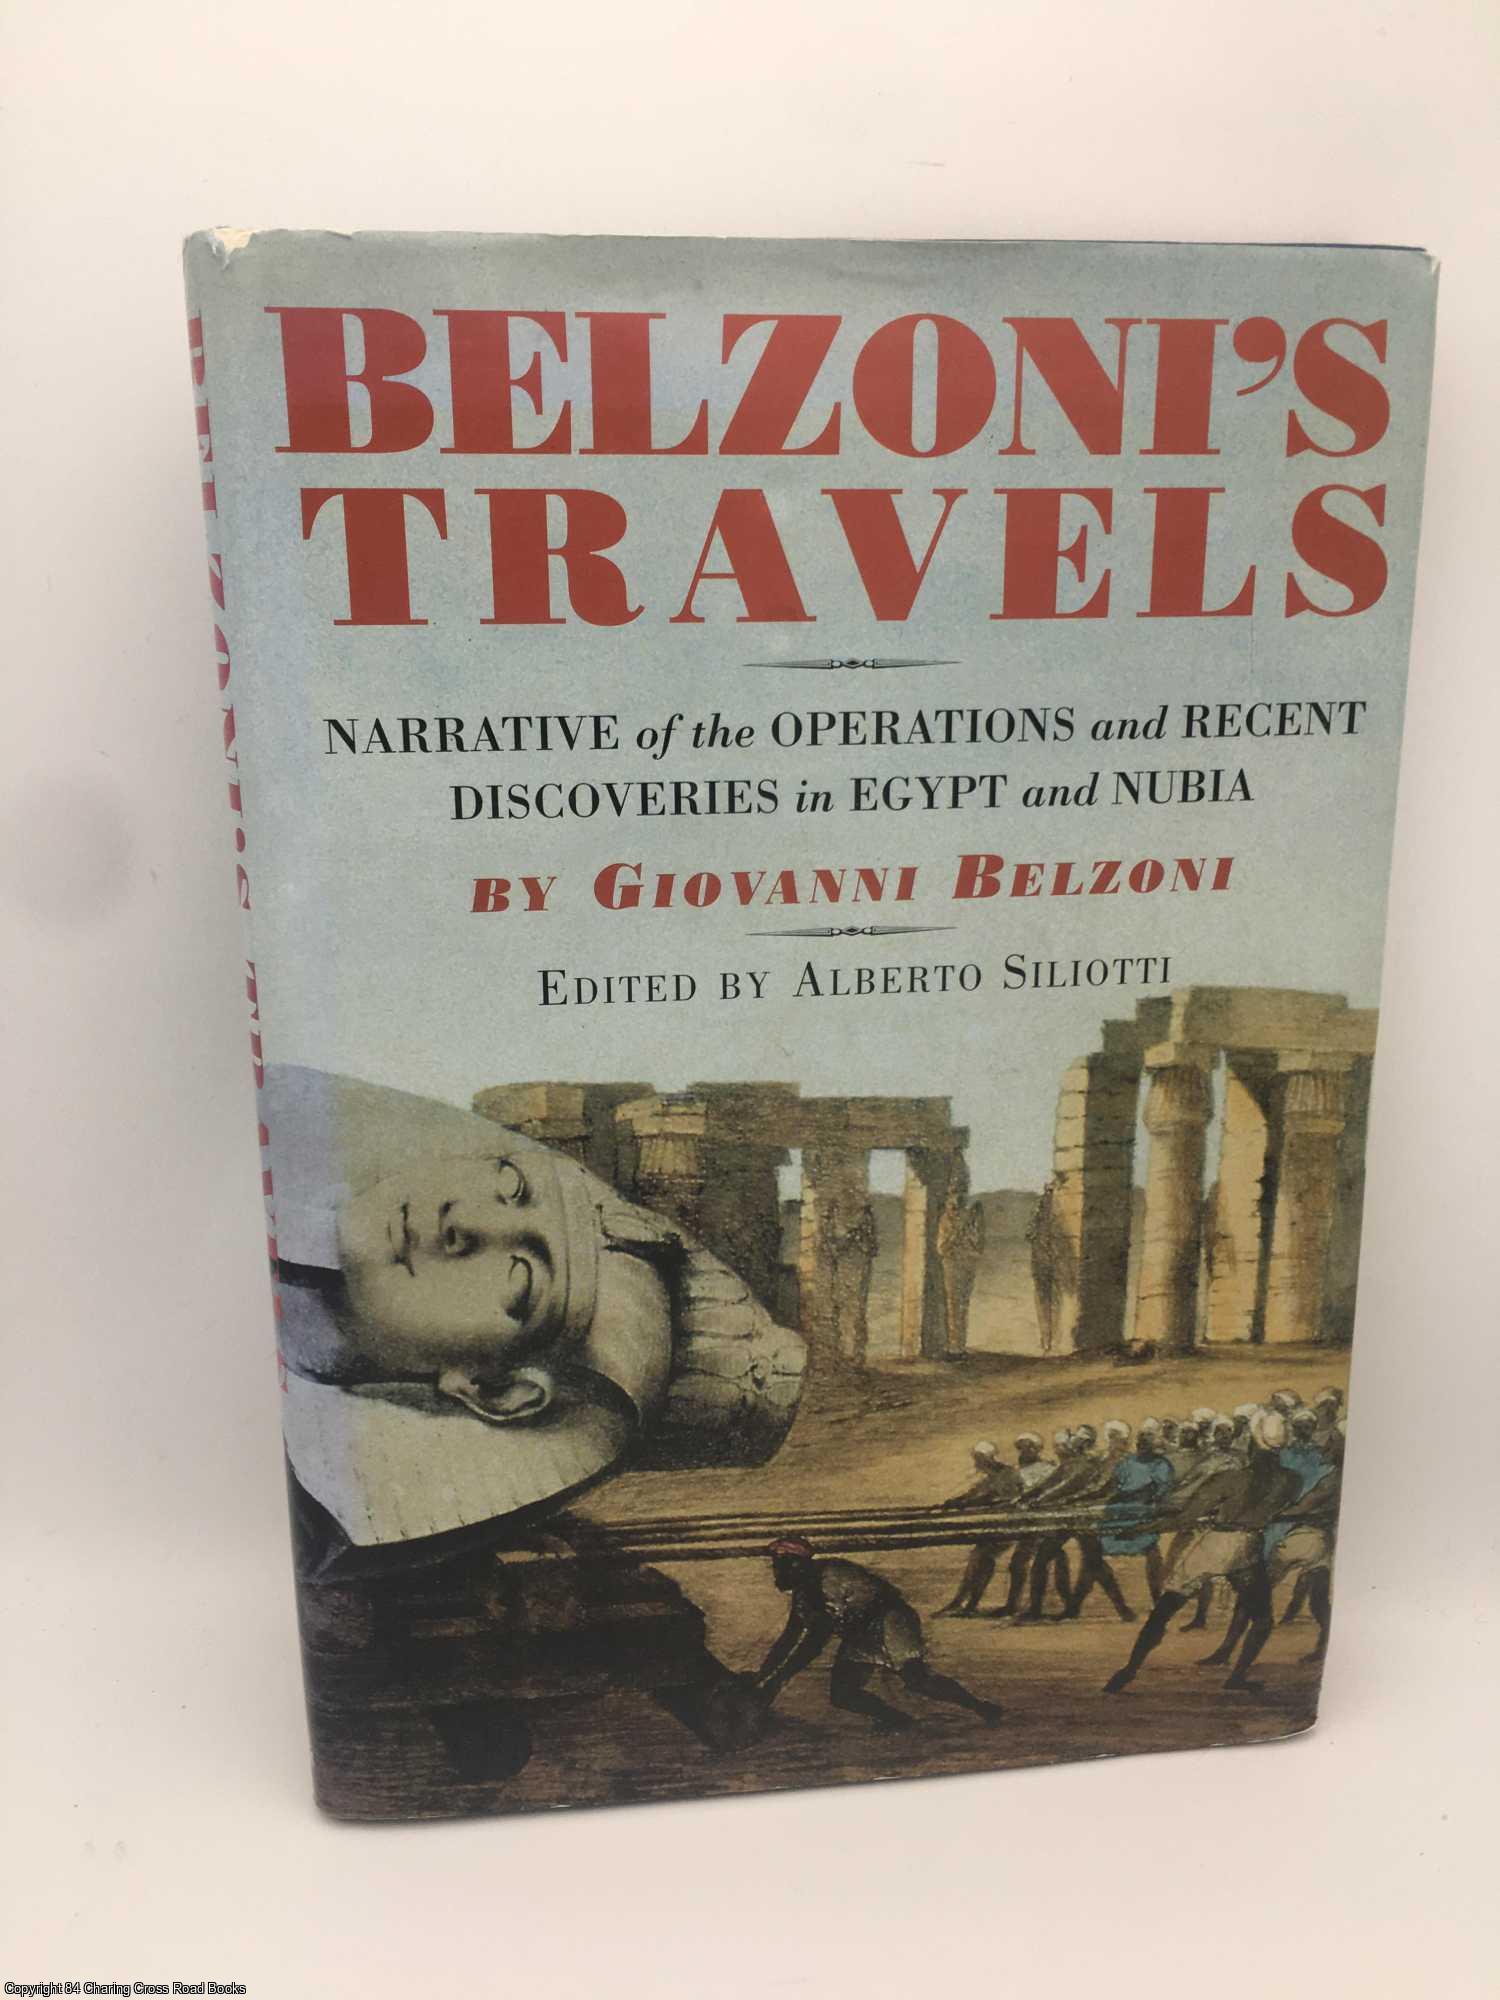 Belzoni, Giovanni Battista; Siliotti - Belzoni's Travels: Narrative of the Operations and Recent Discoveries in Egypt and Nubia